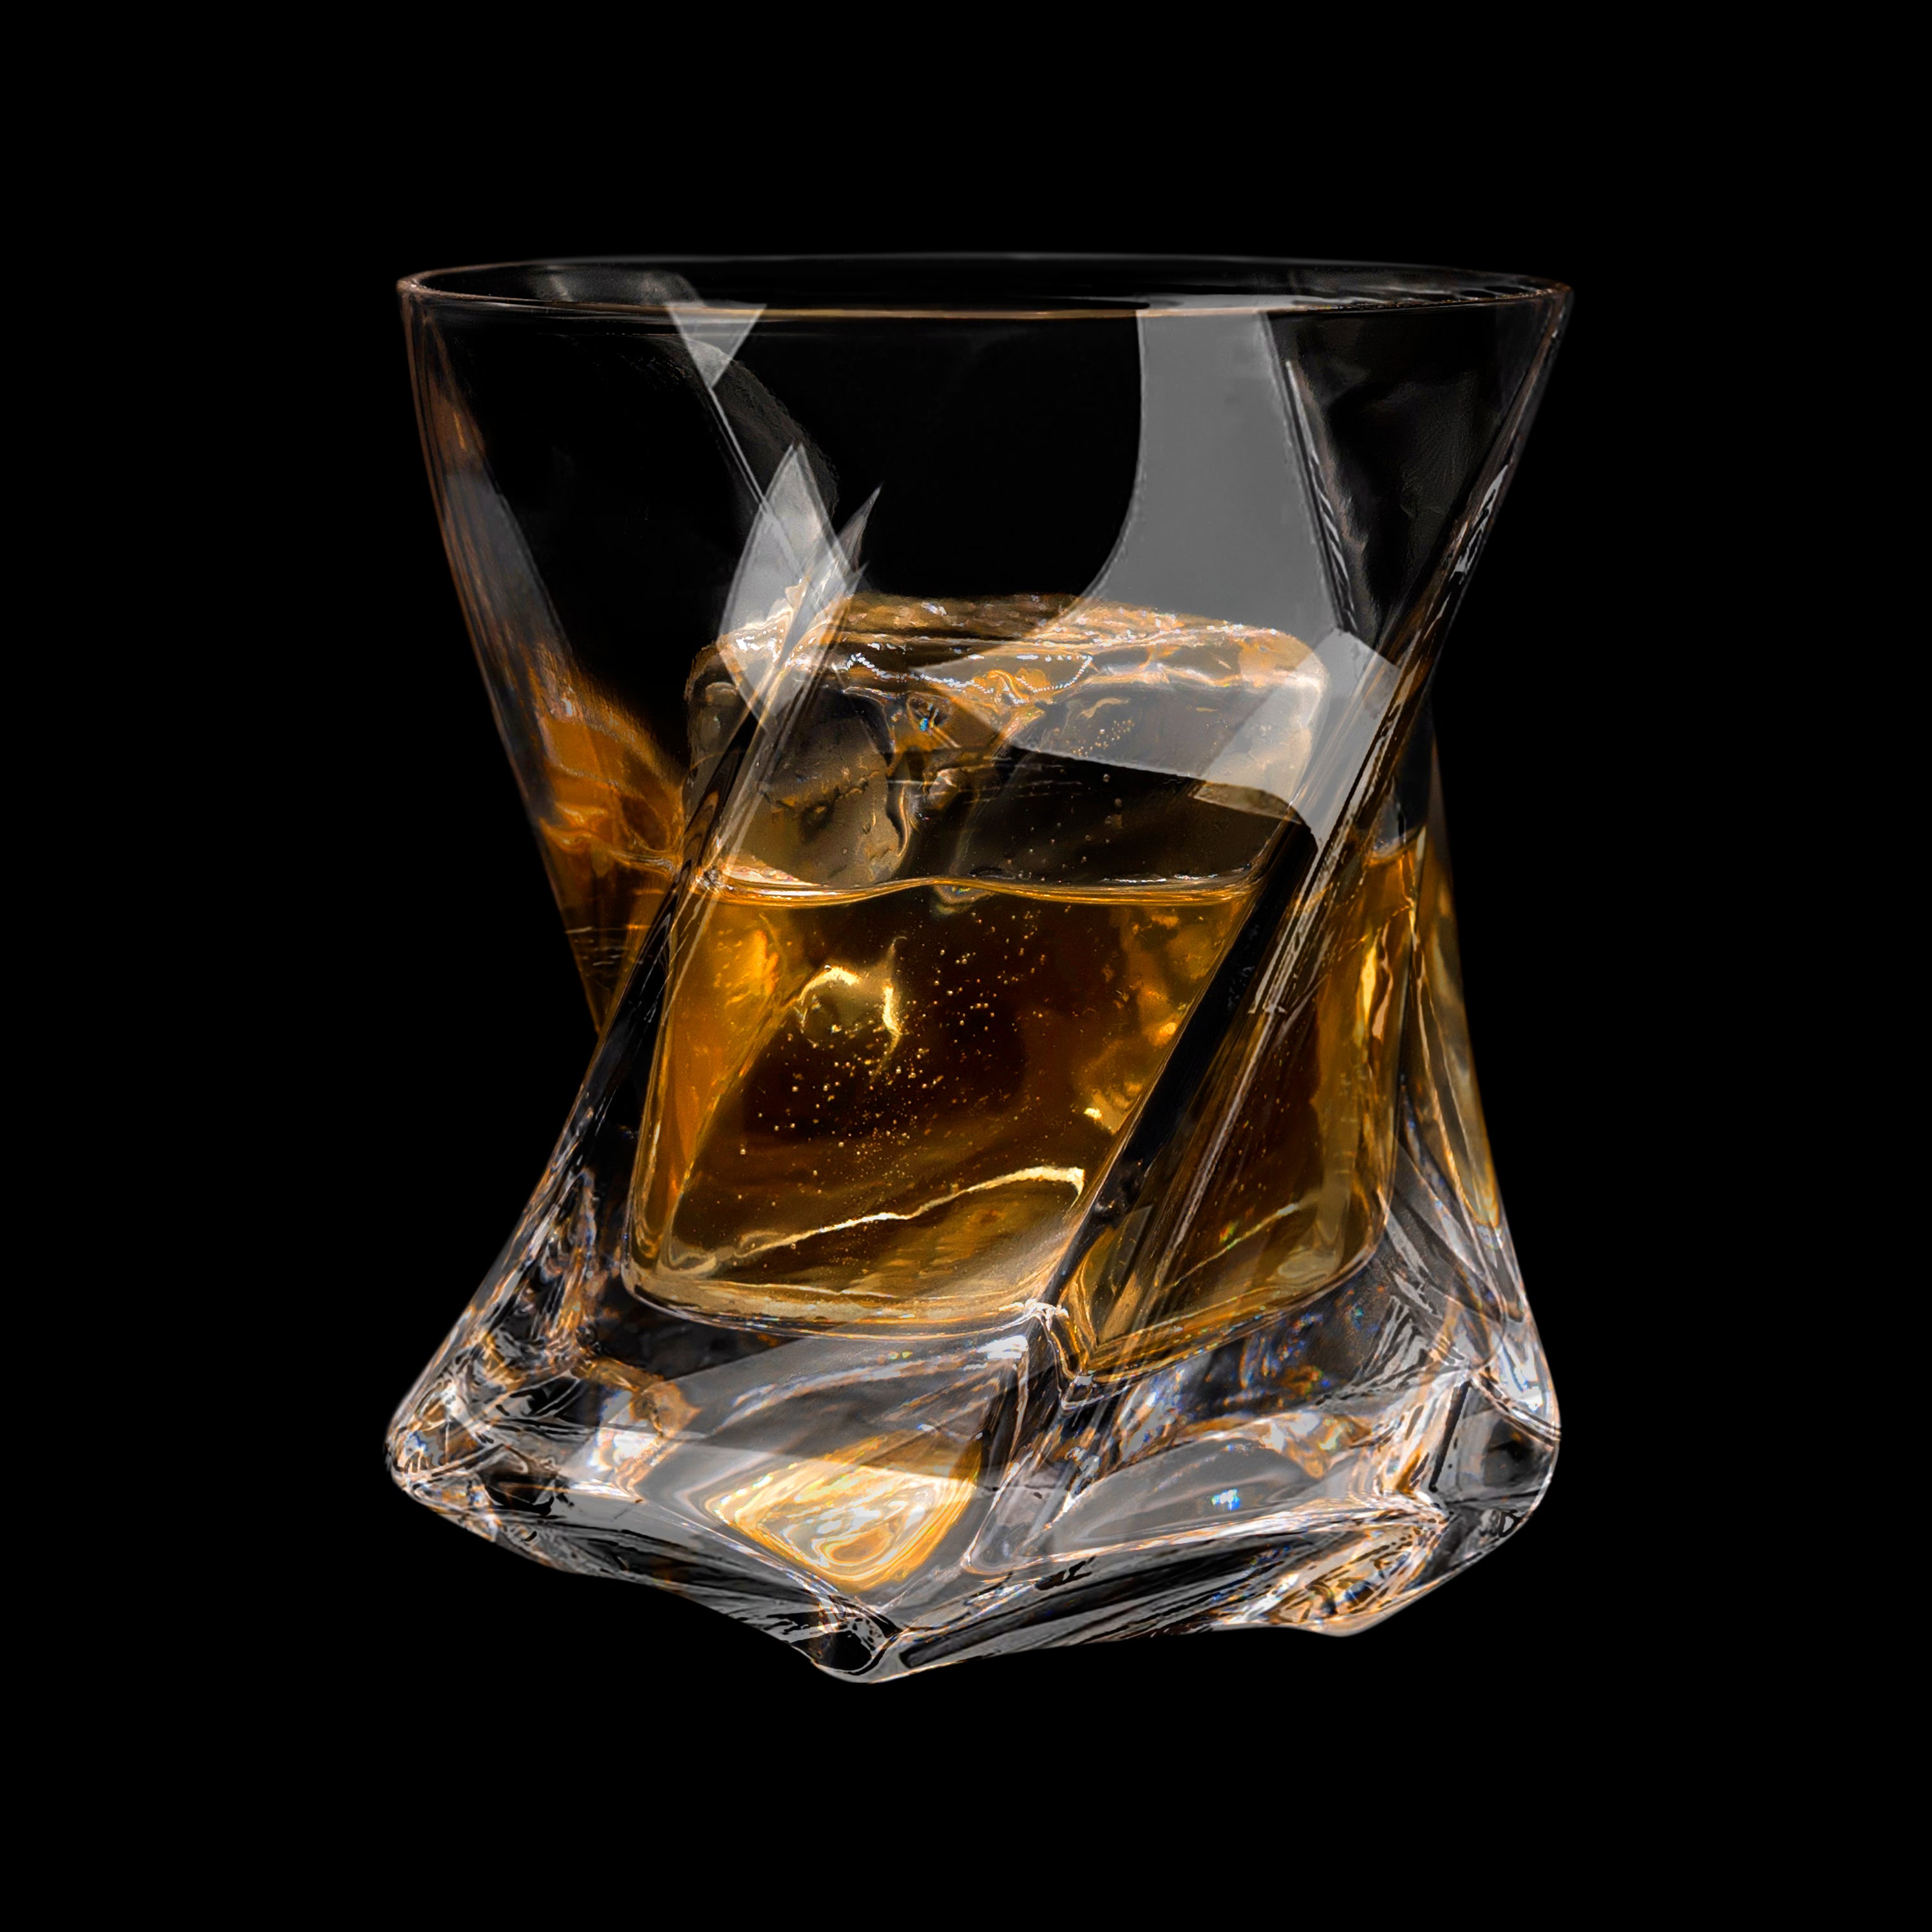 True Whiskey Glass & Ice Sphere Set, 2 Whiskey Tumblers, 1 Ice Sphere Mold,  Bourbon Glass Set, cool gadgets for men, ice mold, rocks glasses, cocktail